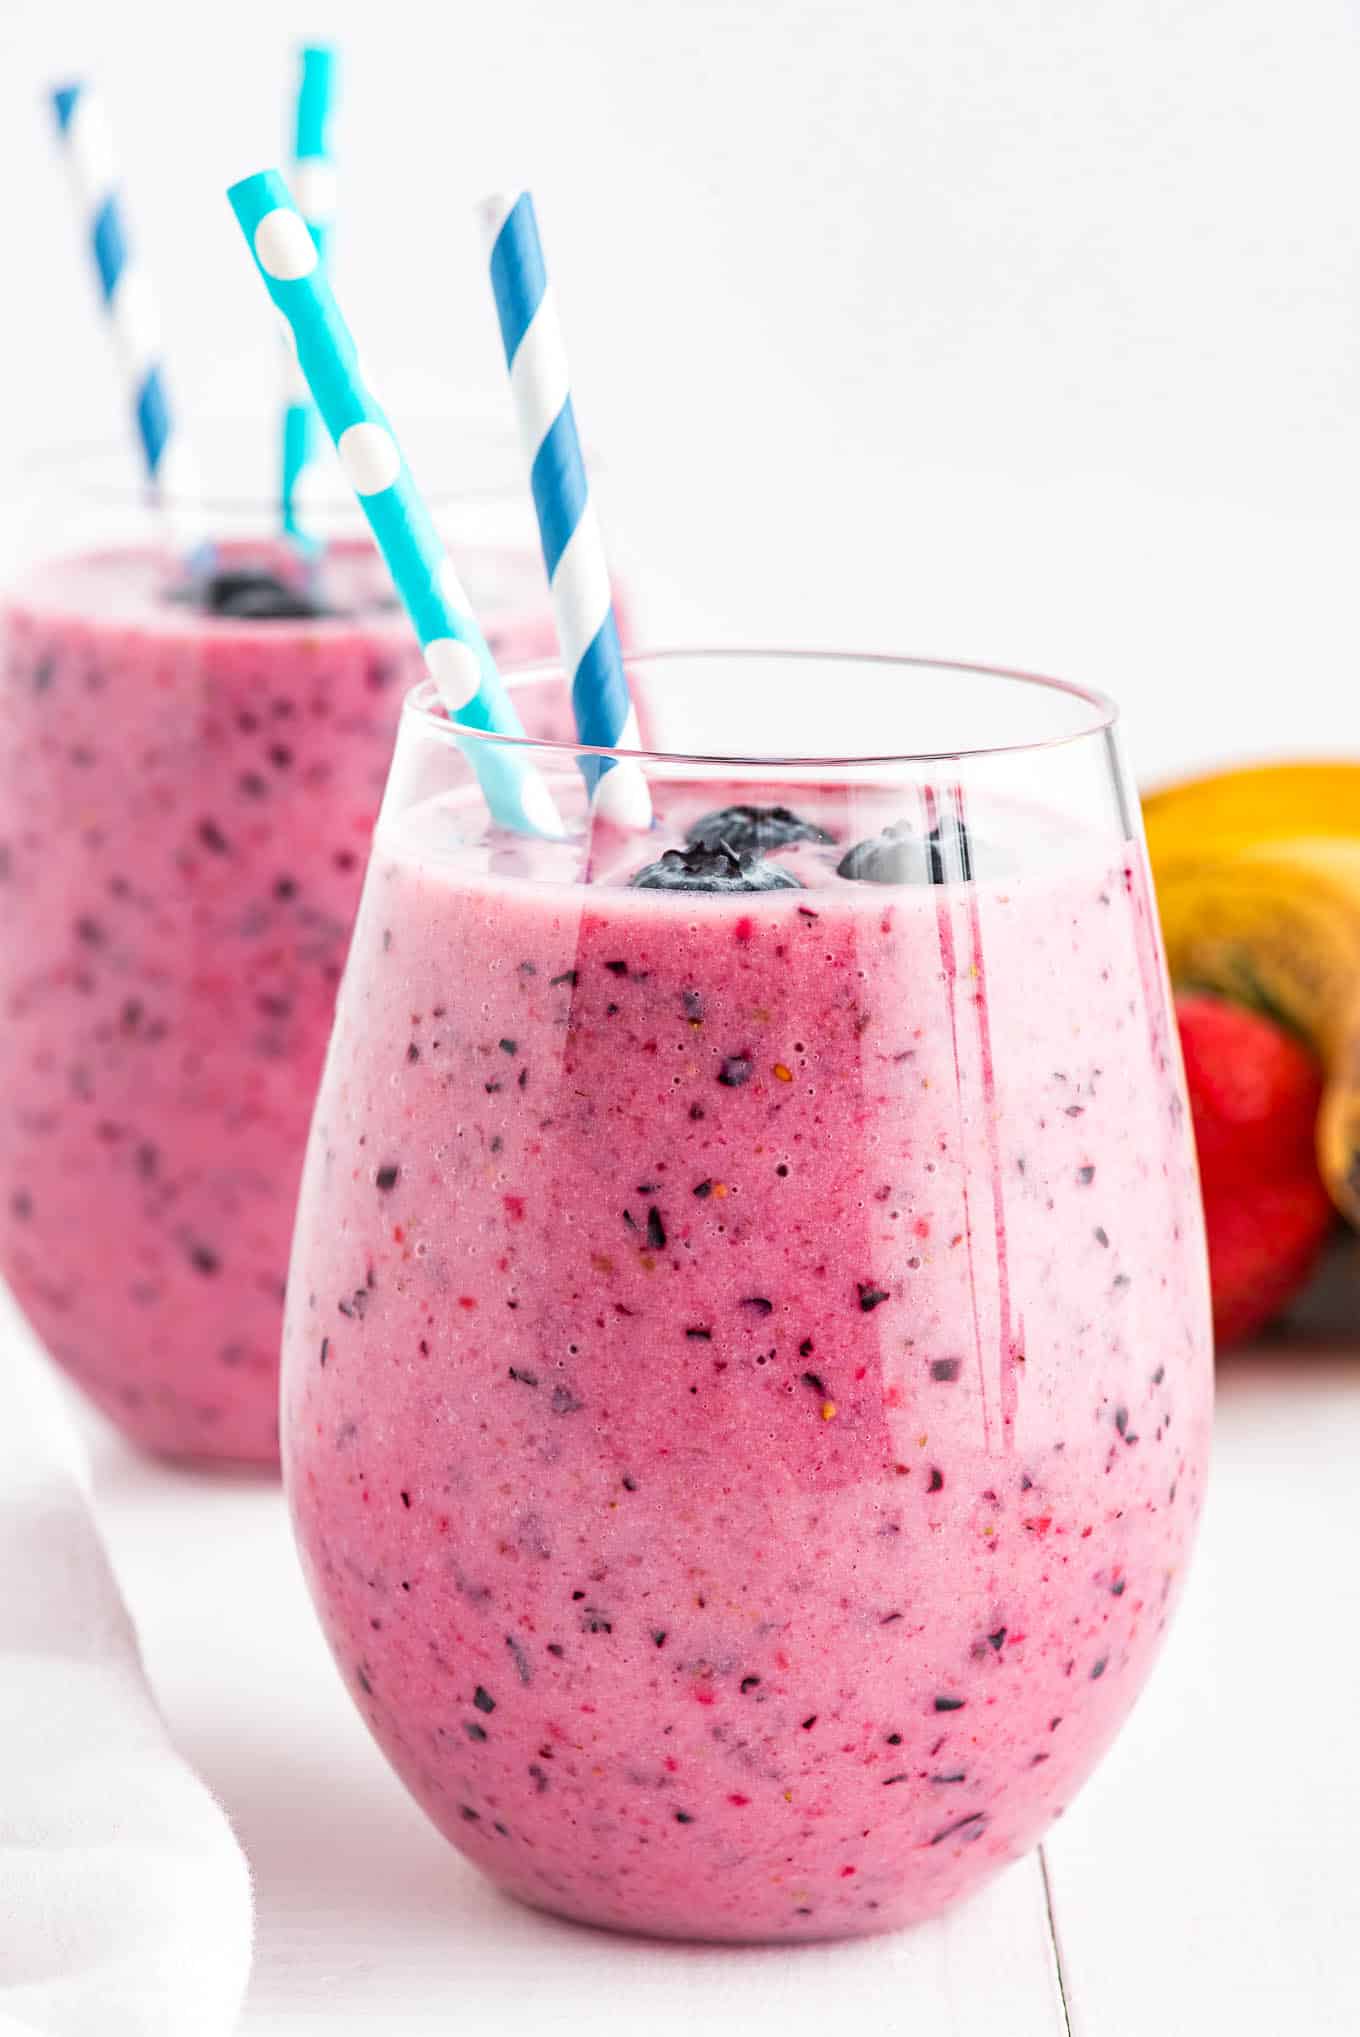 Glass of blueberry smoothie.